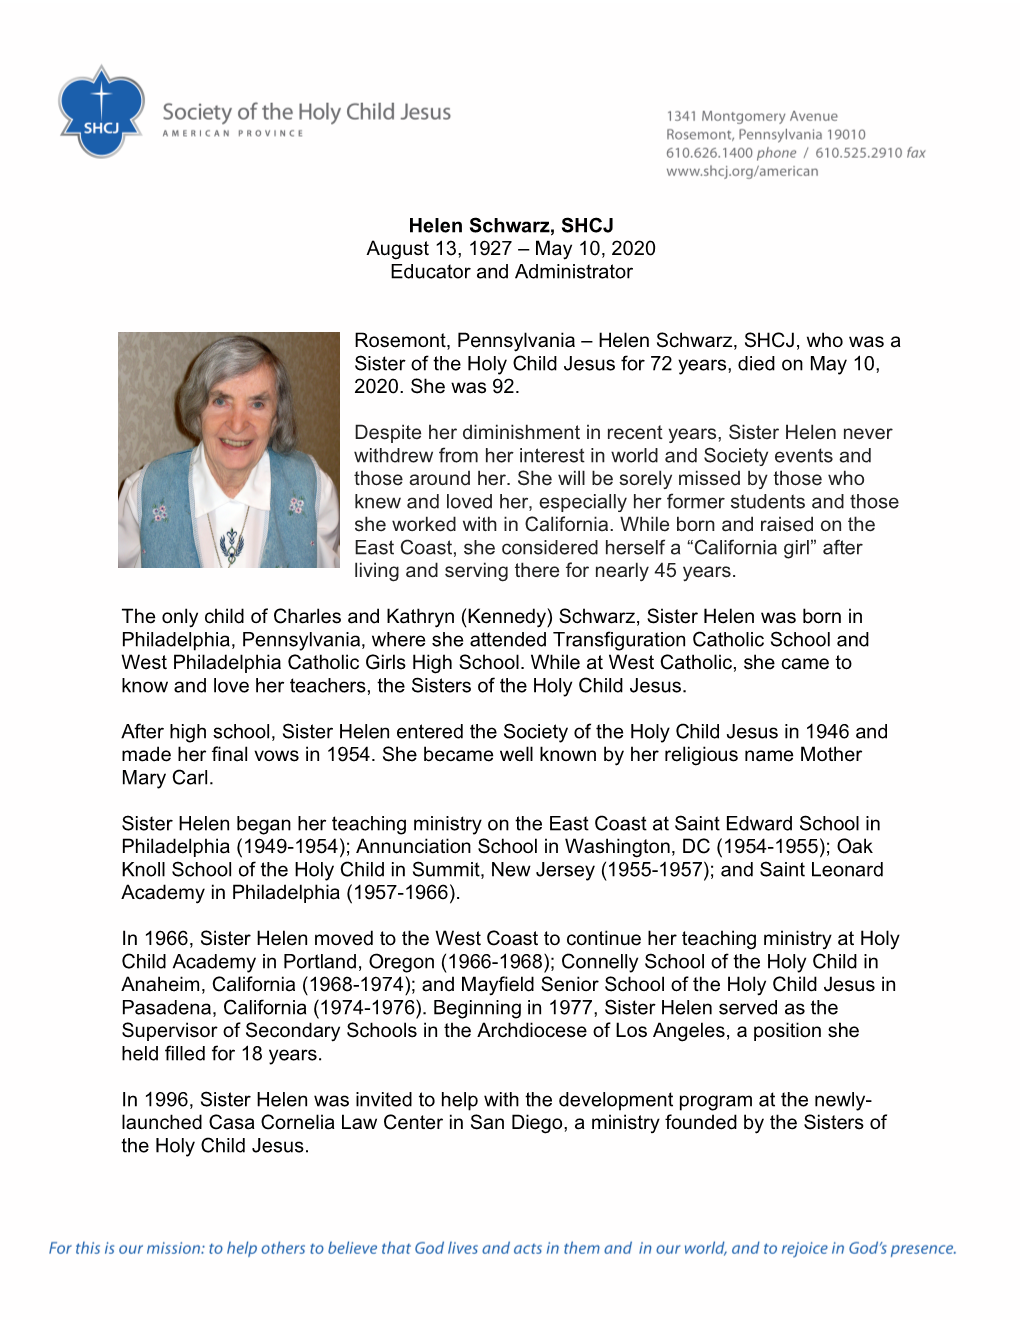 Helen Schwarz, SHCJ August 13, 1927 – May 10, 2020 Educator and Administrator